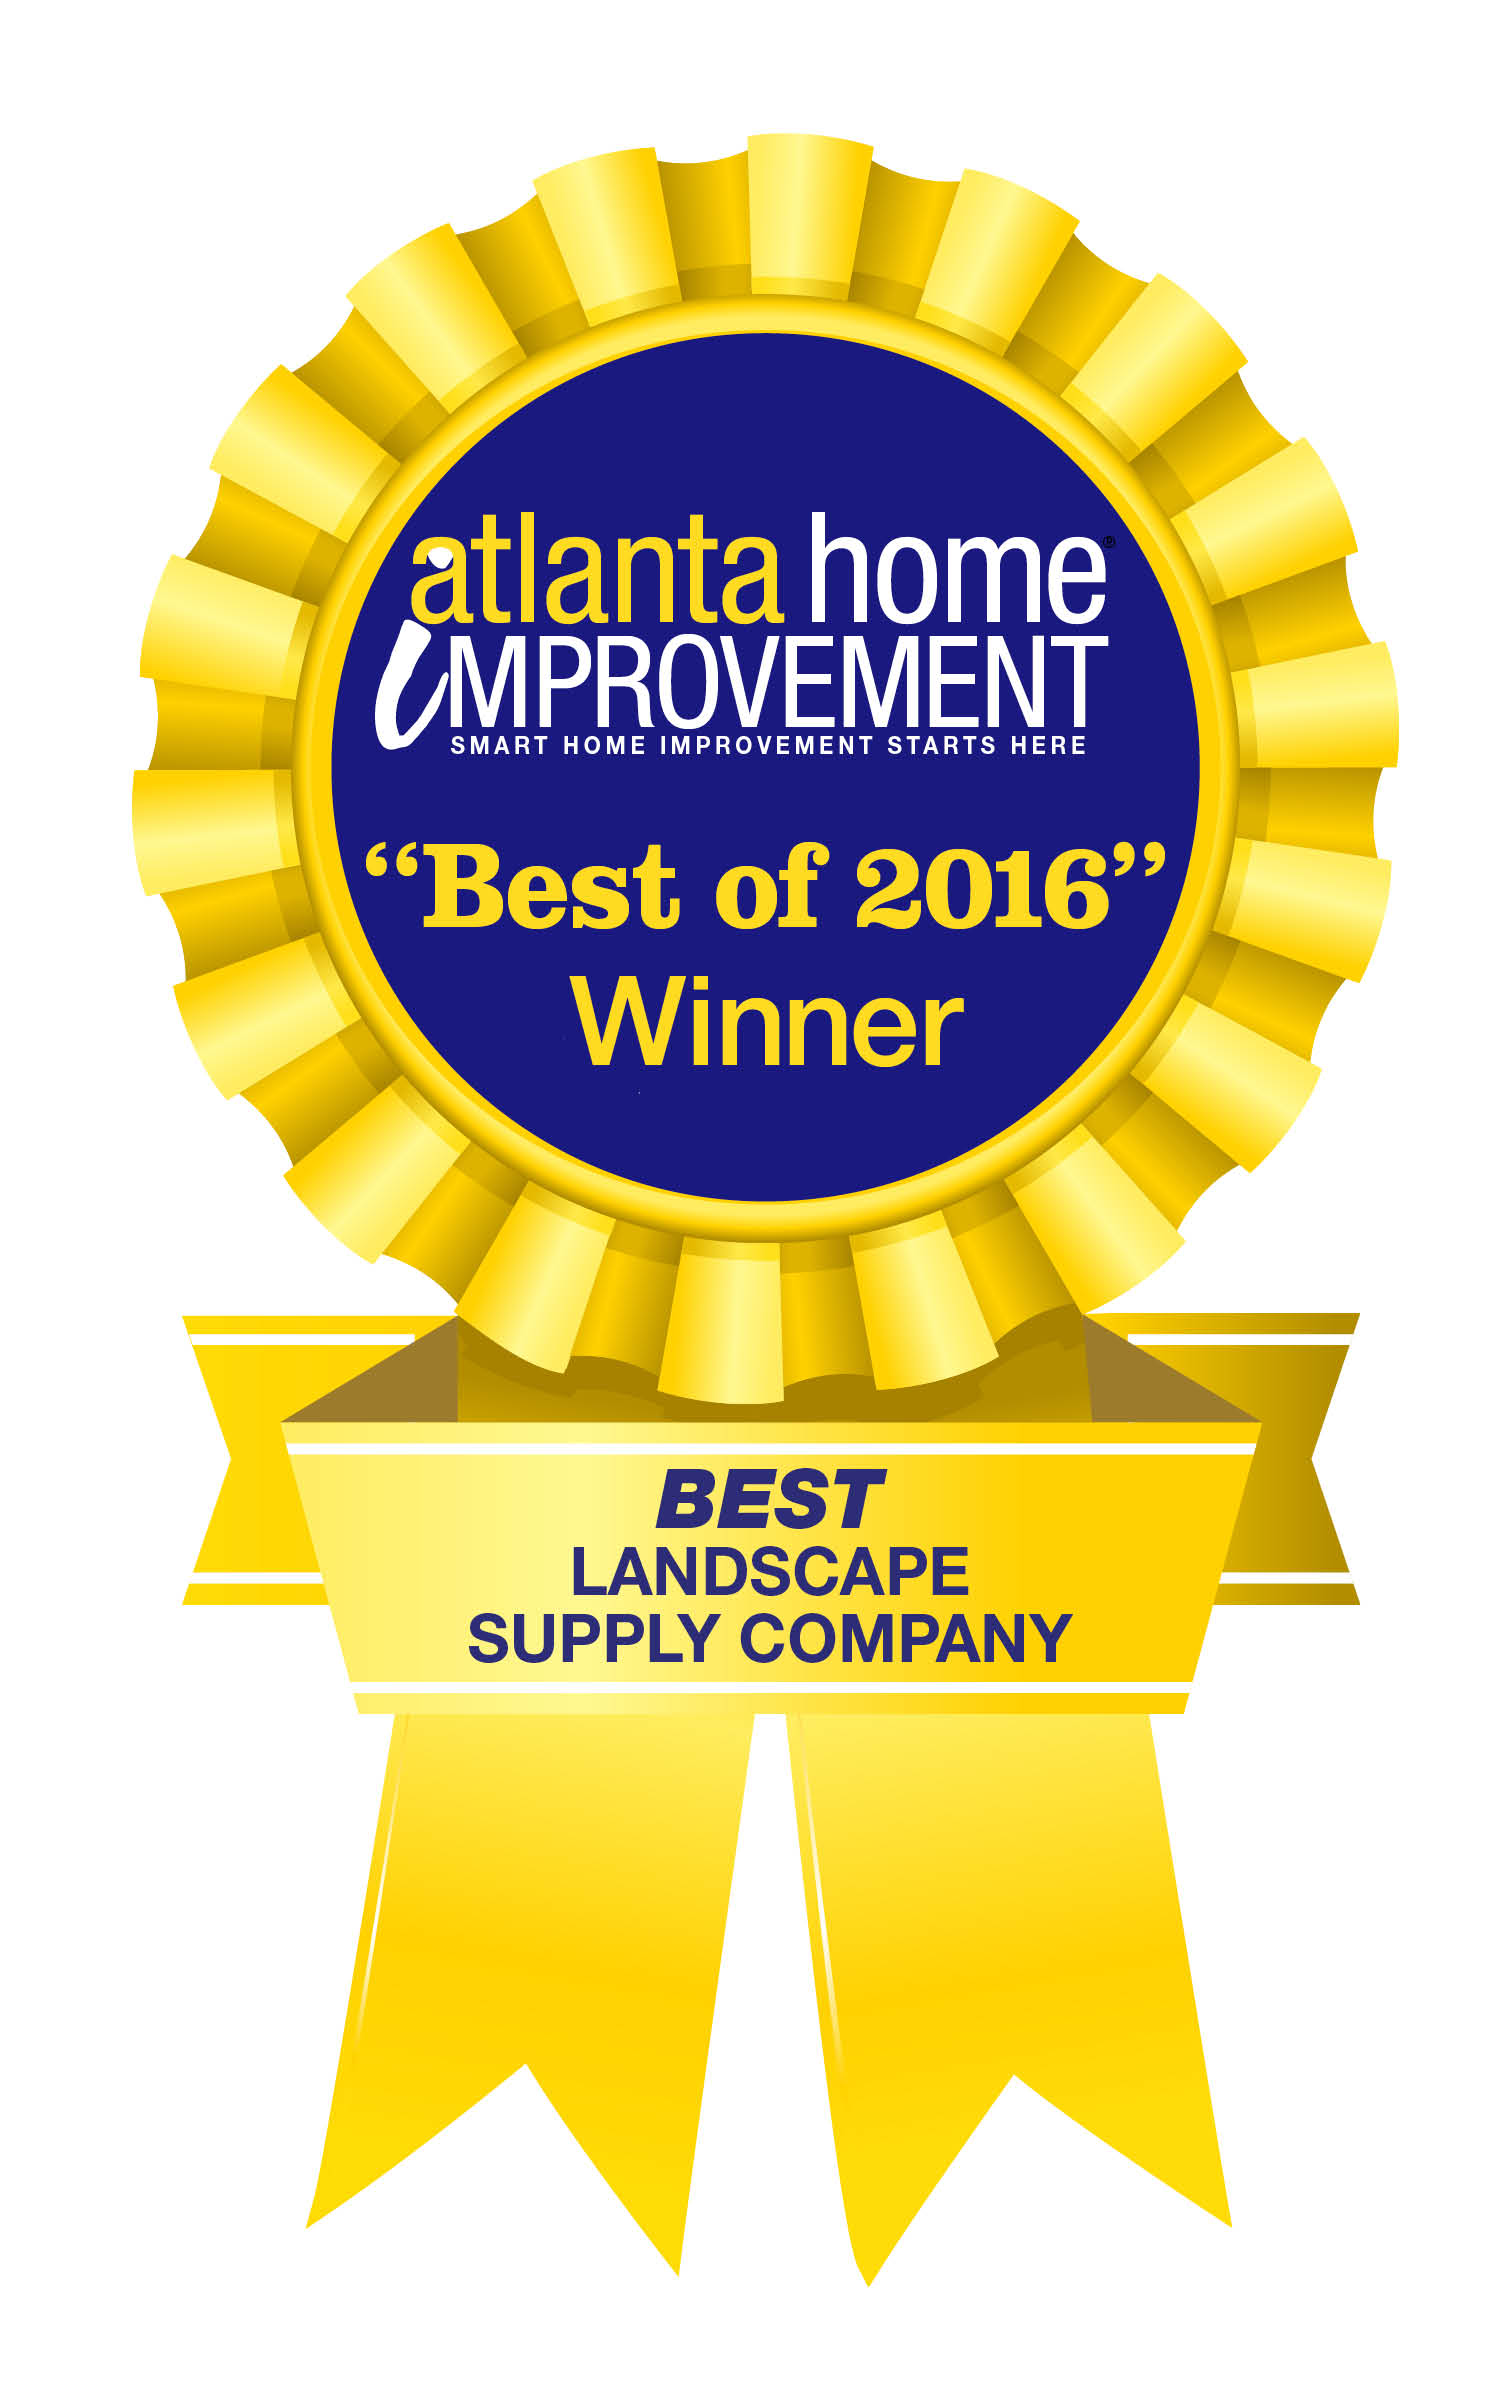 Super-Sod received the "2016 Best Landscape Supply Company" award from Atlanta Home Improvement magazine.